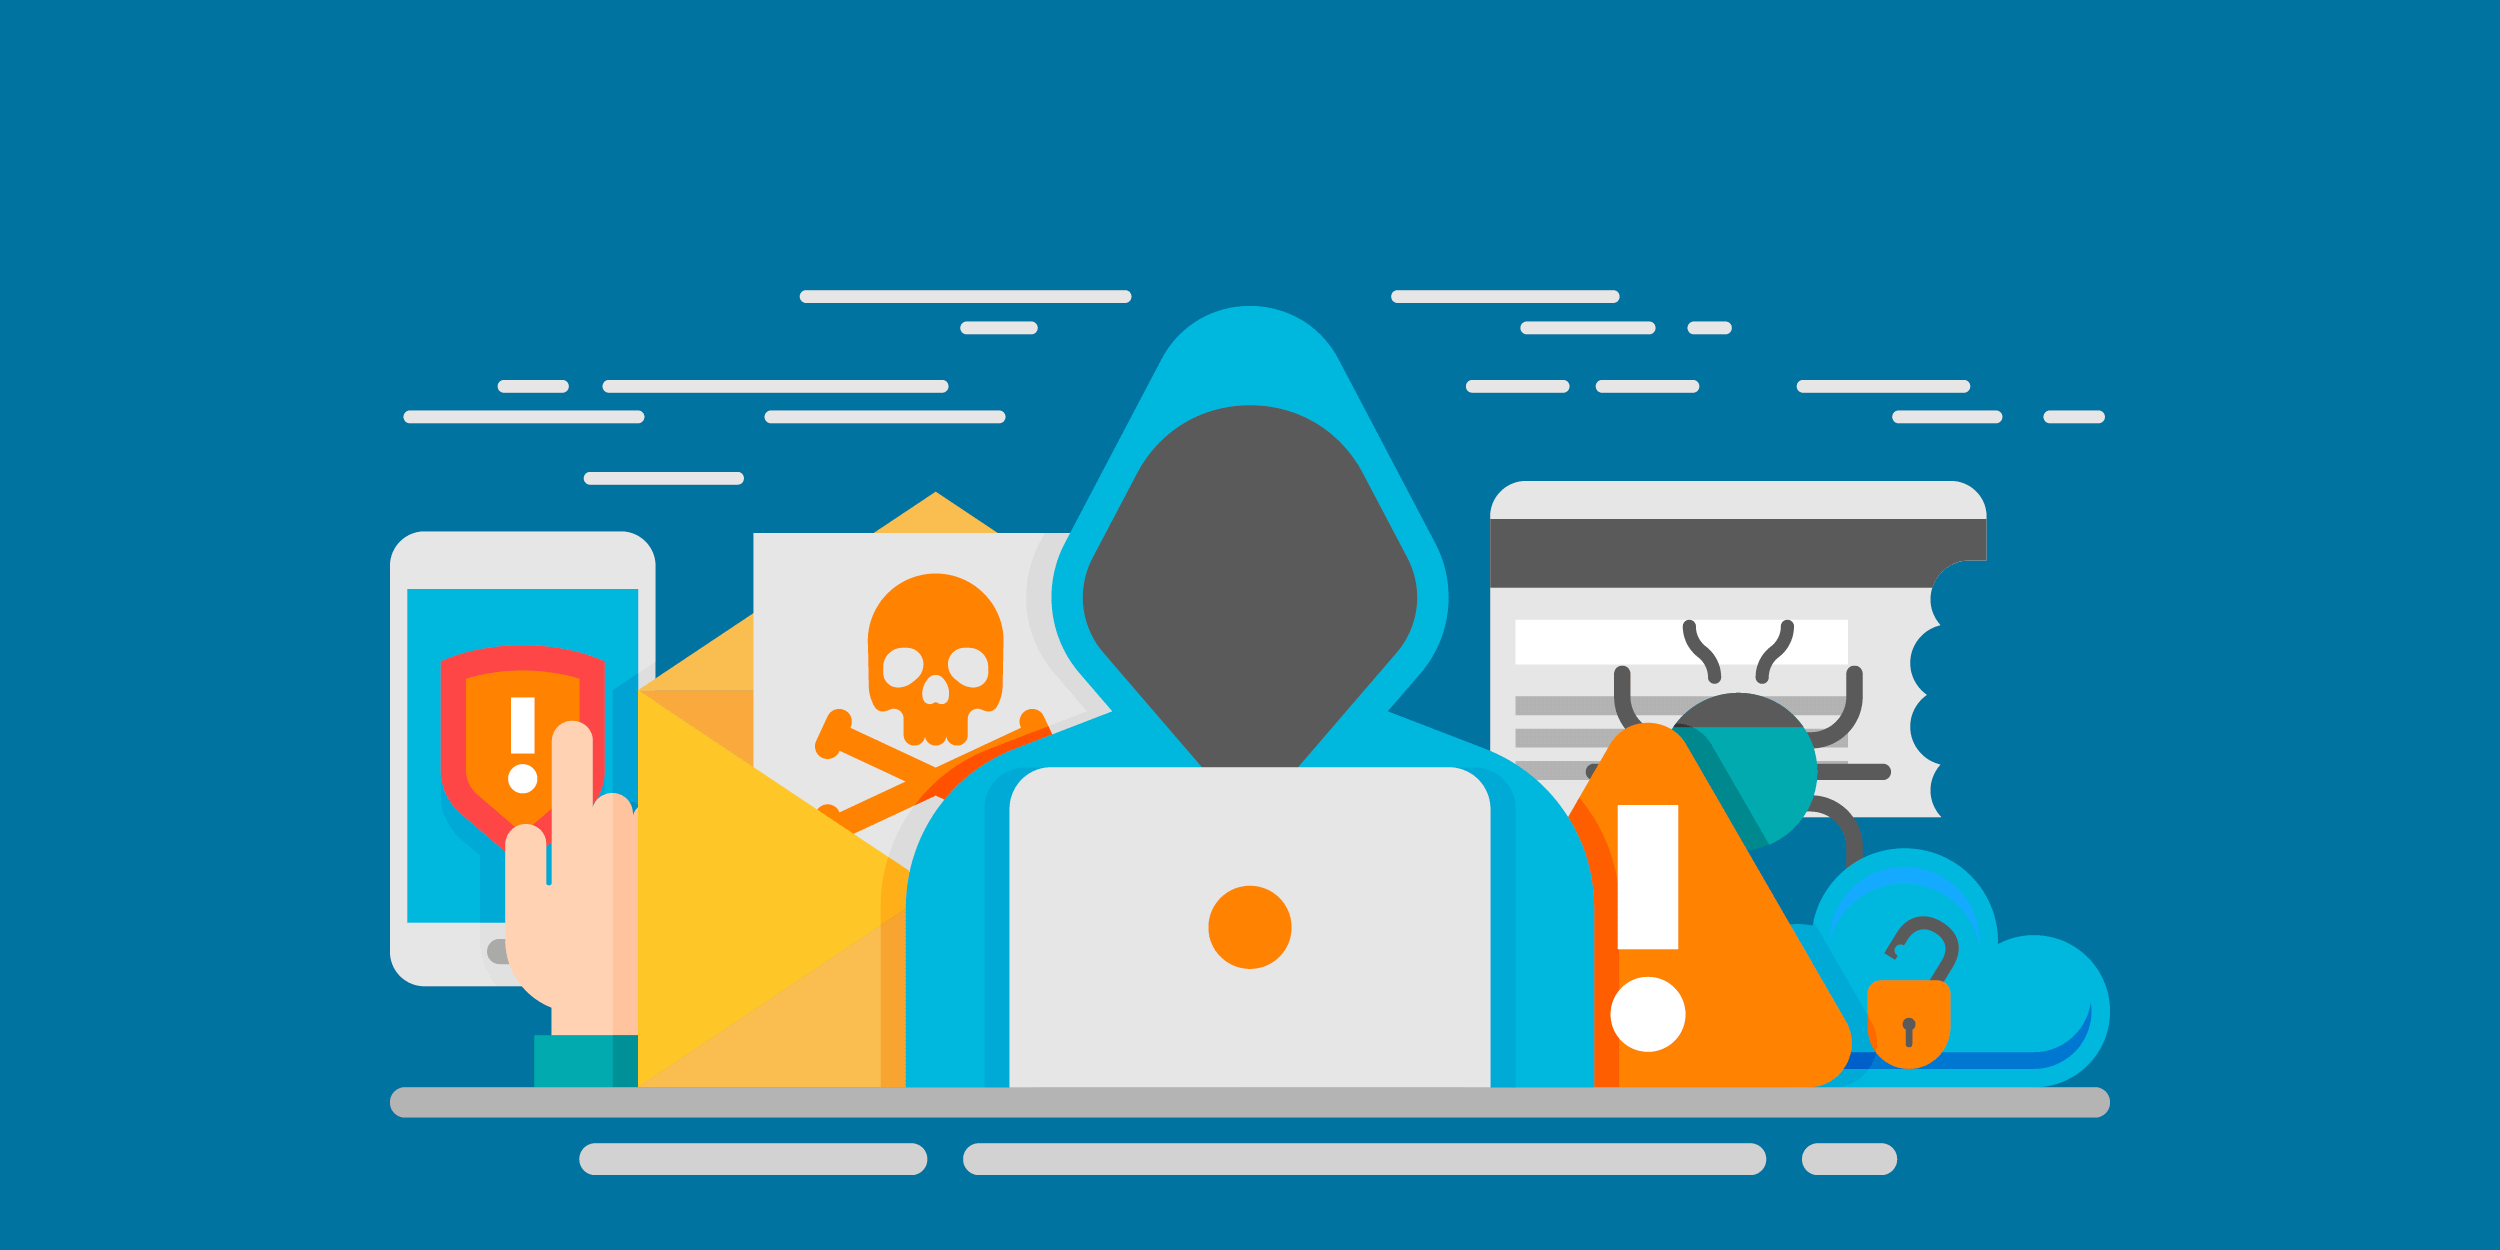 illustration of a faceless person with a laptop next to a poisoned letter and a credit card with a bug on it, representing hackers and the need for digital security